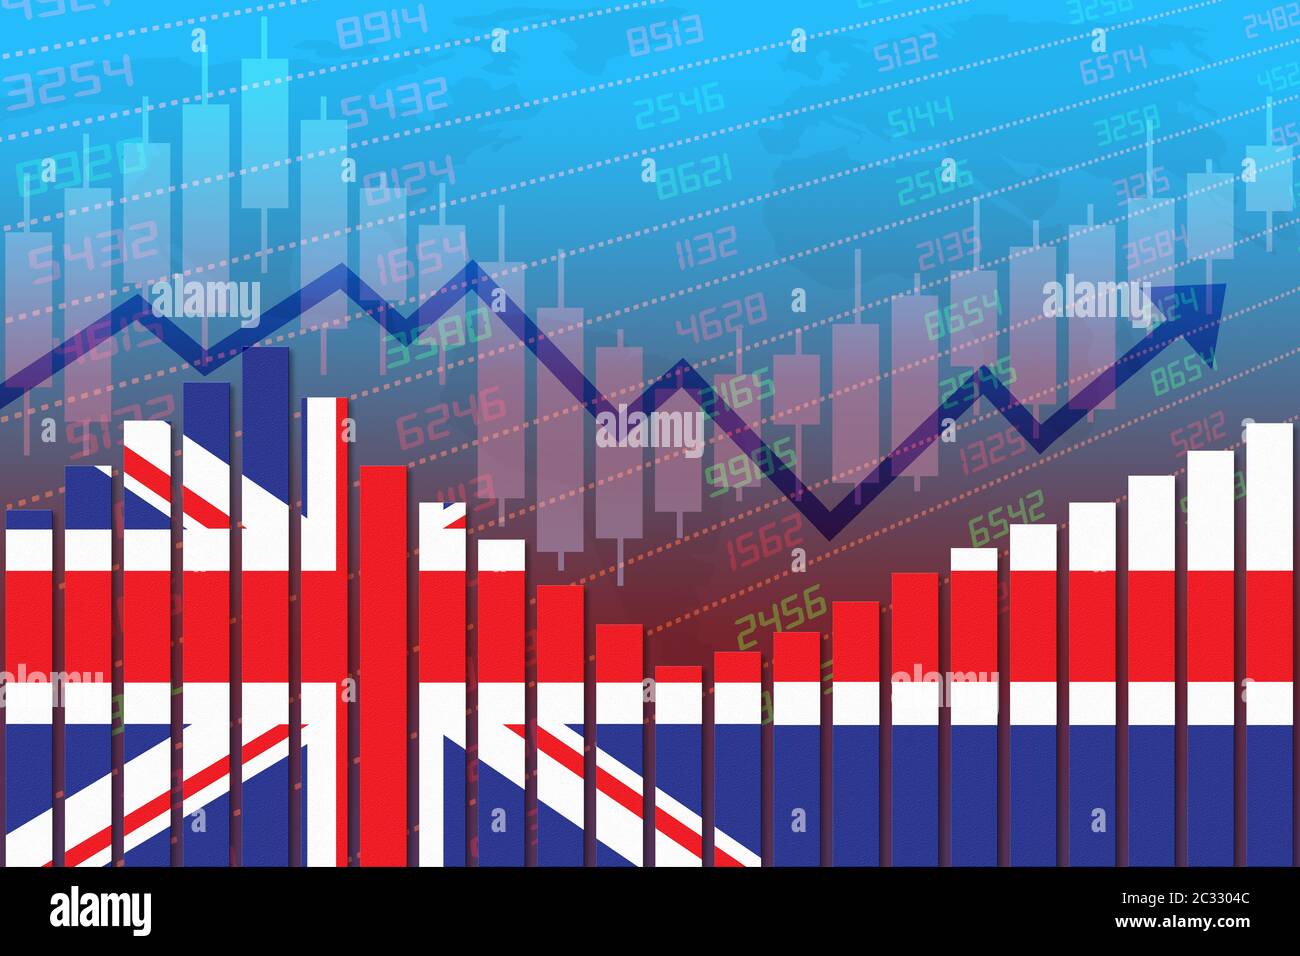 Flag of UK or Britain on bar chart concept of economic recovery and business improving after crisis such as Covid-19 or other catastrophe as economy a Stock Photo